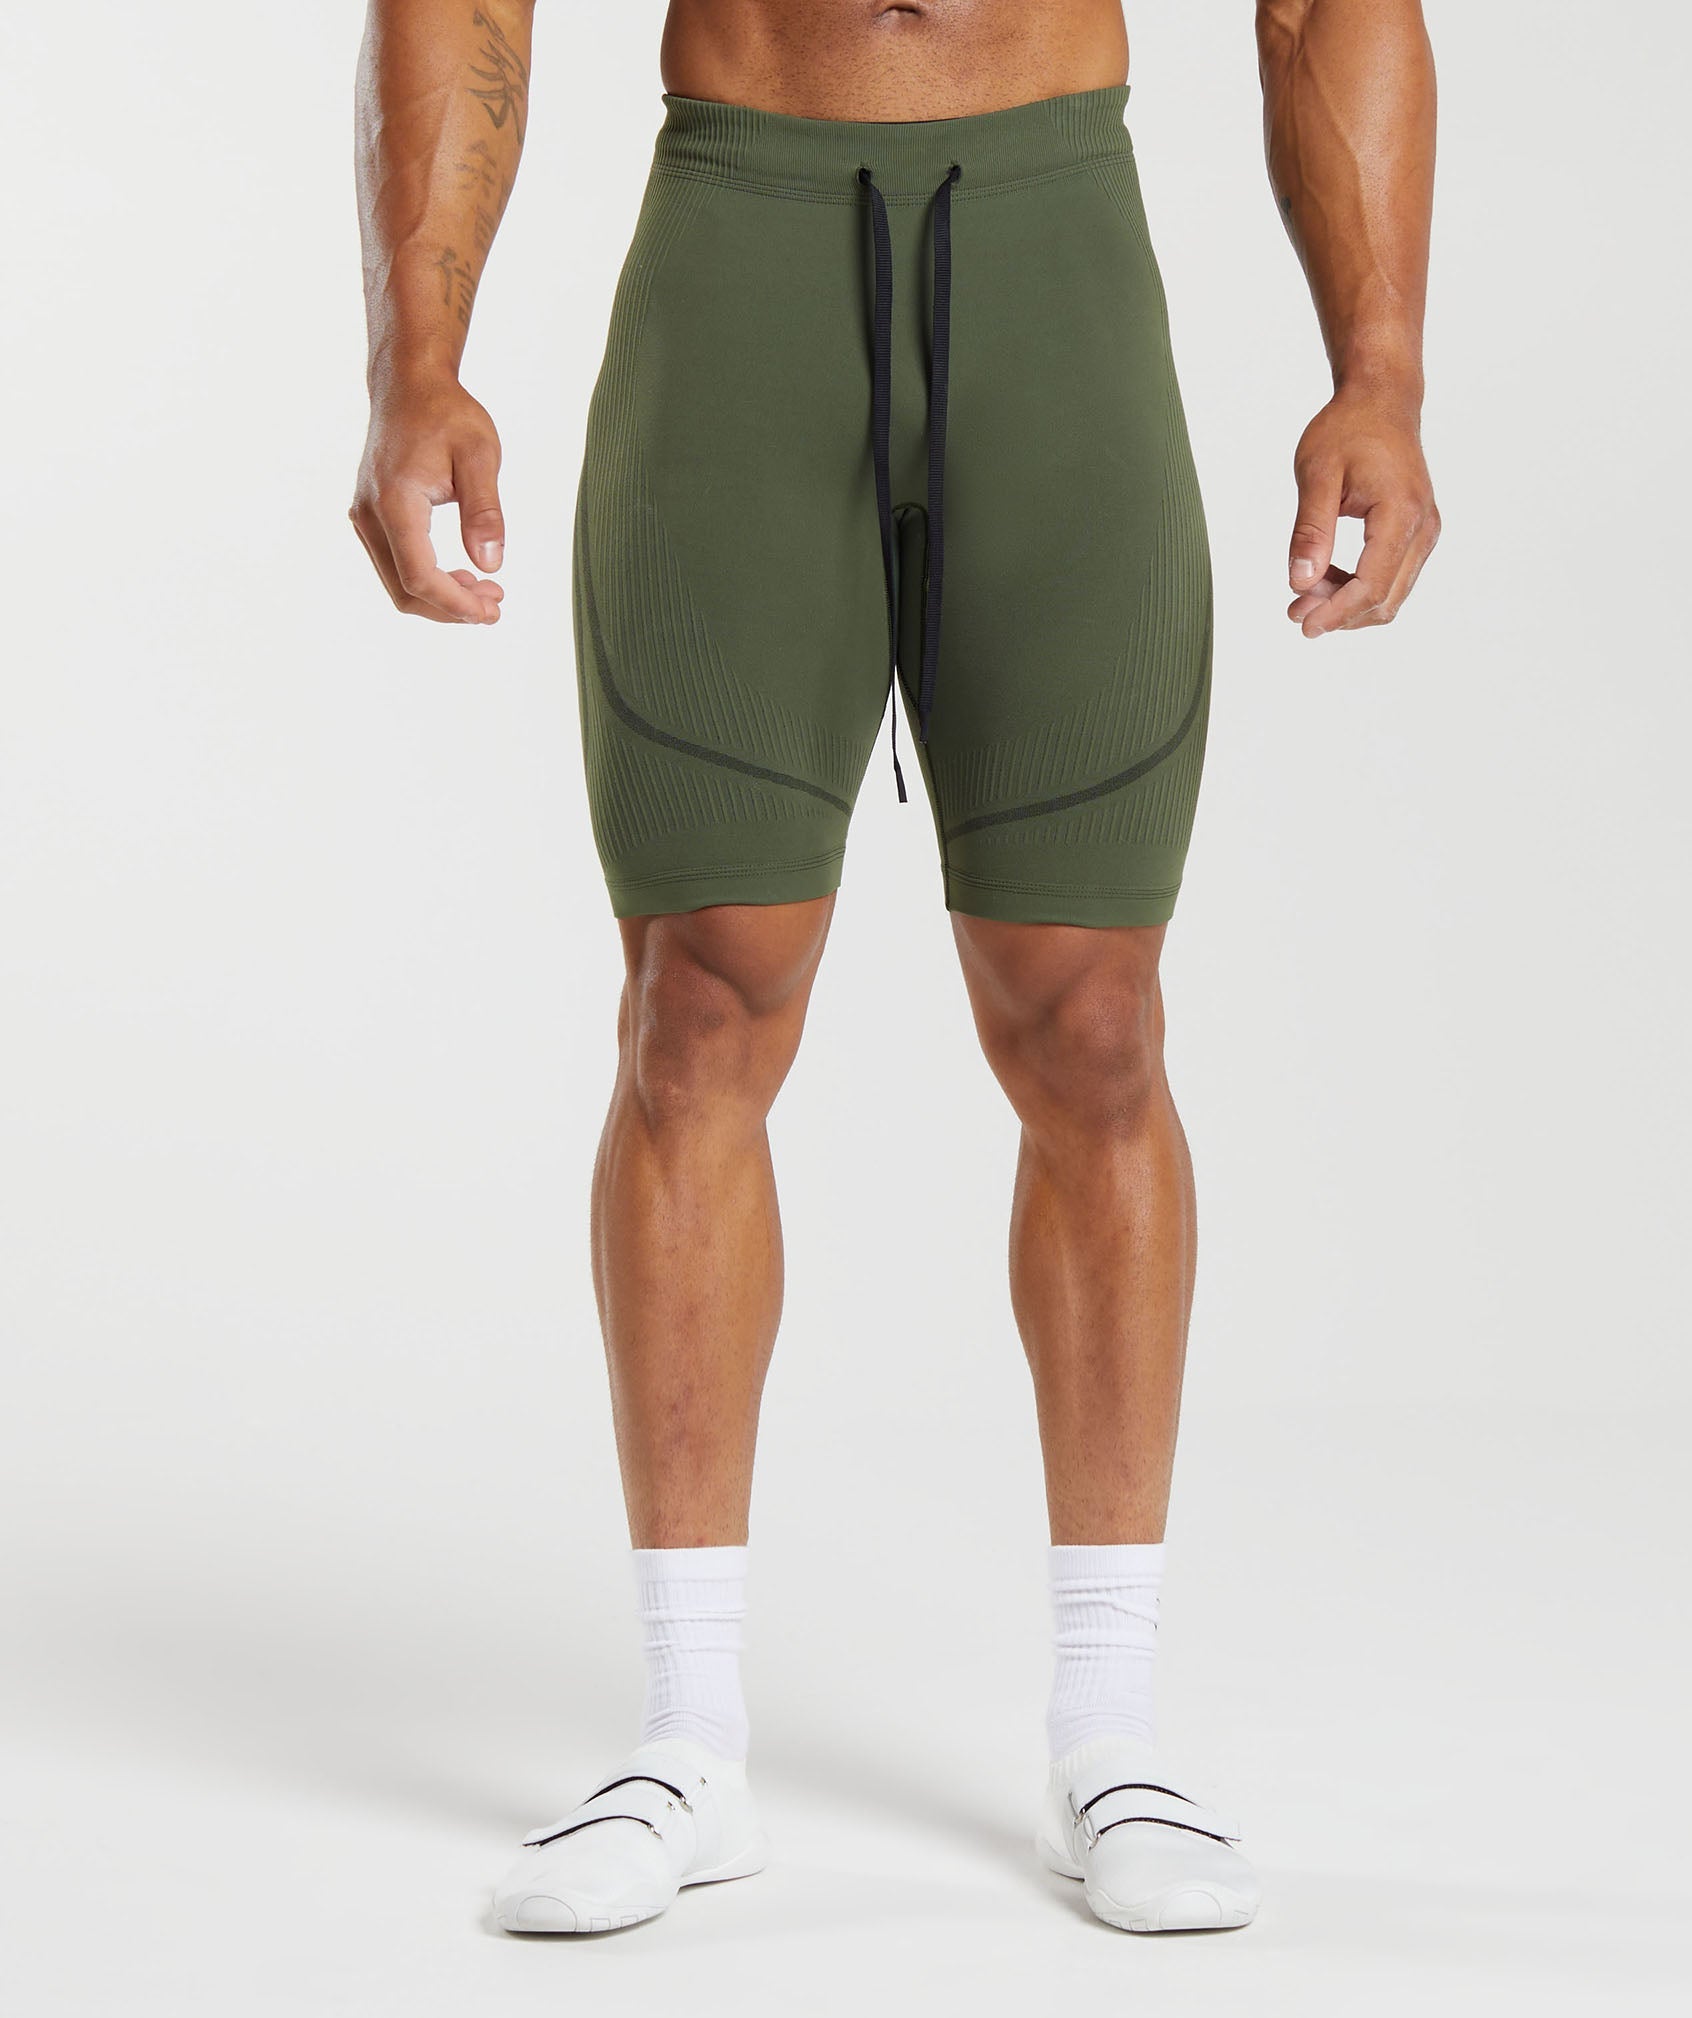 315 Seamless 1/2 Shorts in Winter Olive/Black